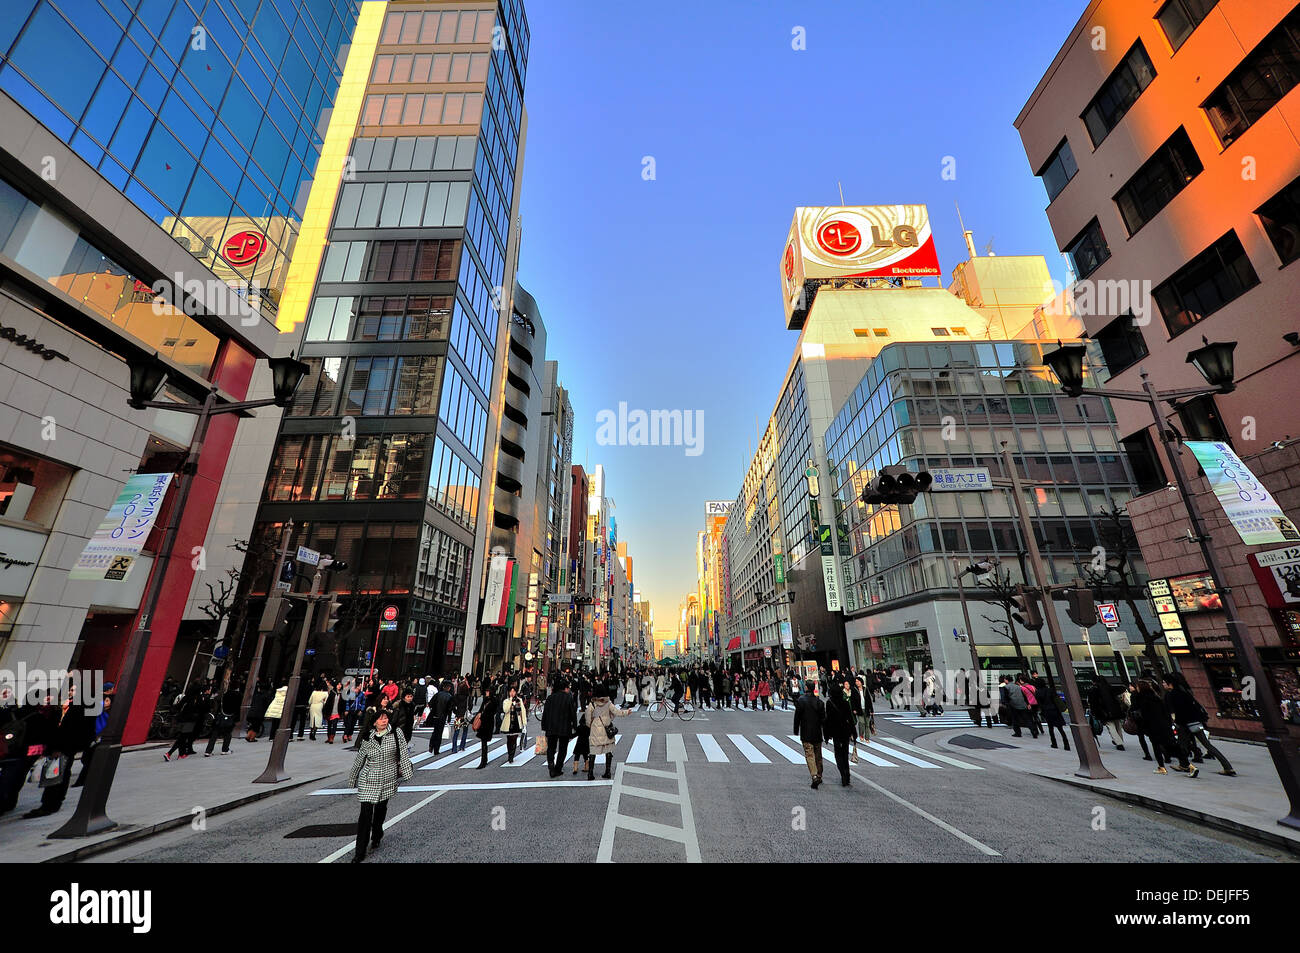 Shoppers and walkers enjoy a beautiful car-free day in the up-scale shopping area of Ginza, Tokyo, Japan Stock Photo